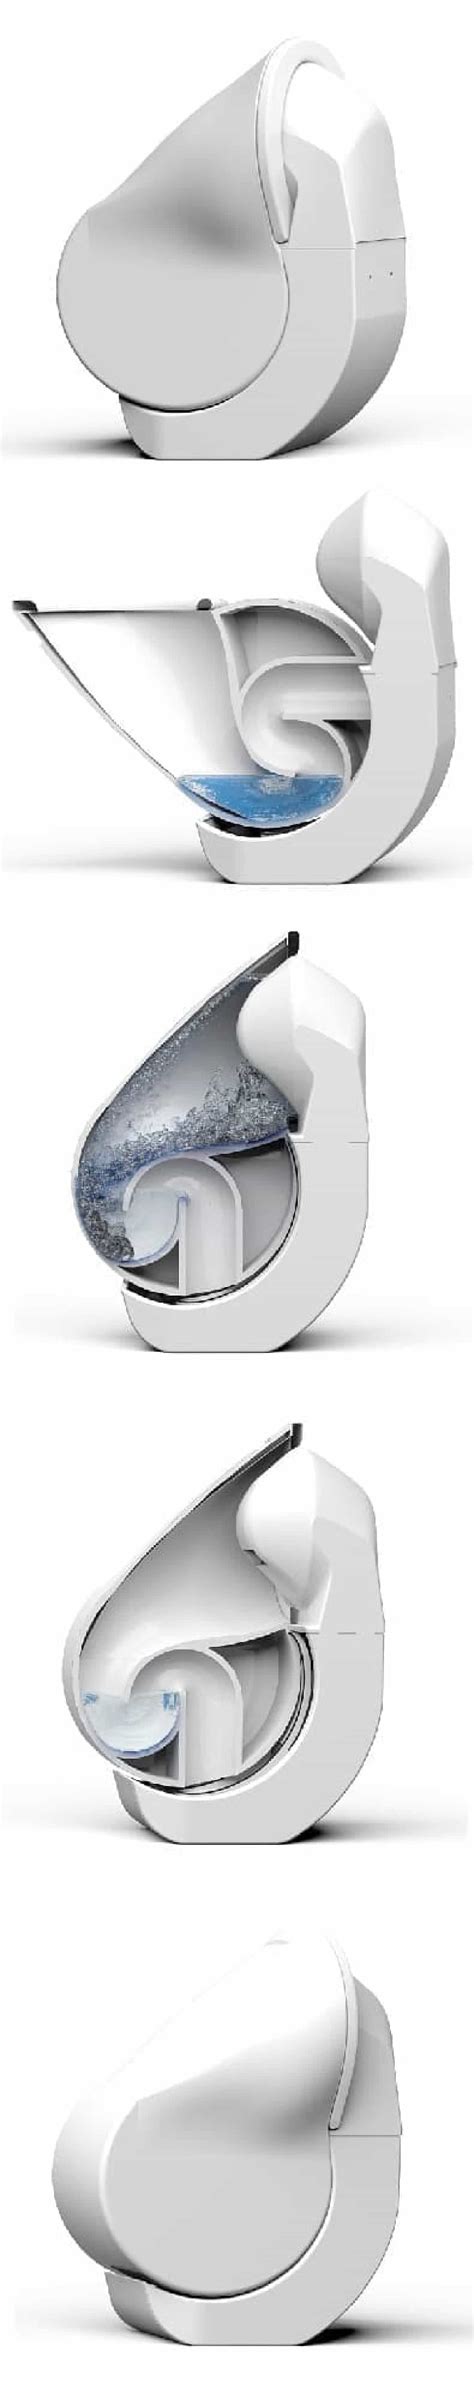 Folding Toilet Iota Folding Toilet Is It Really Perfect For A